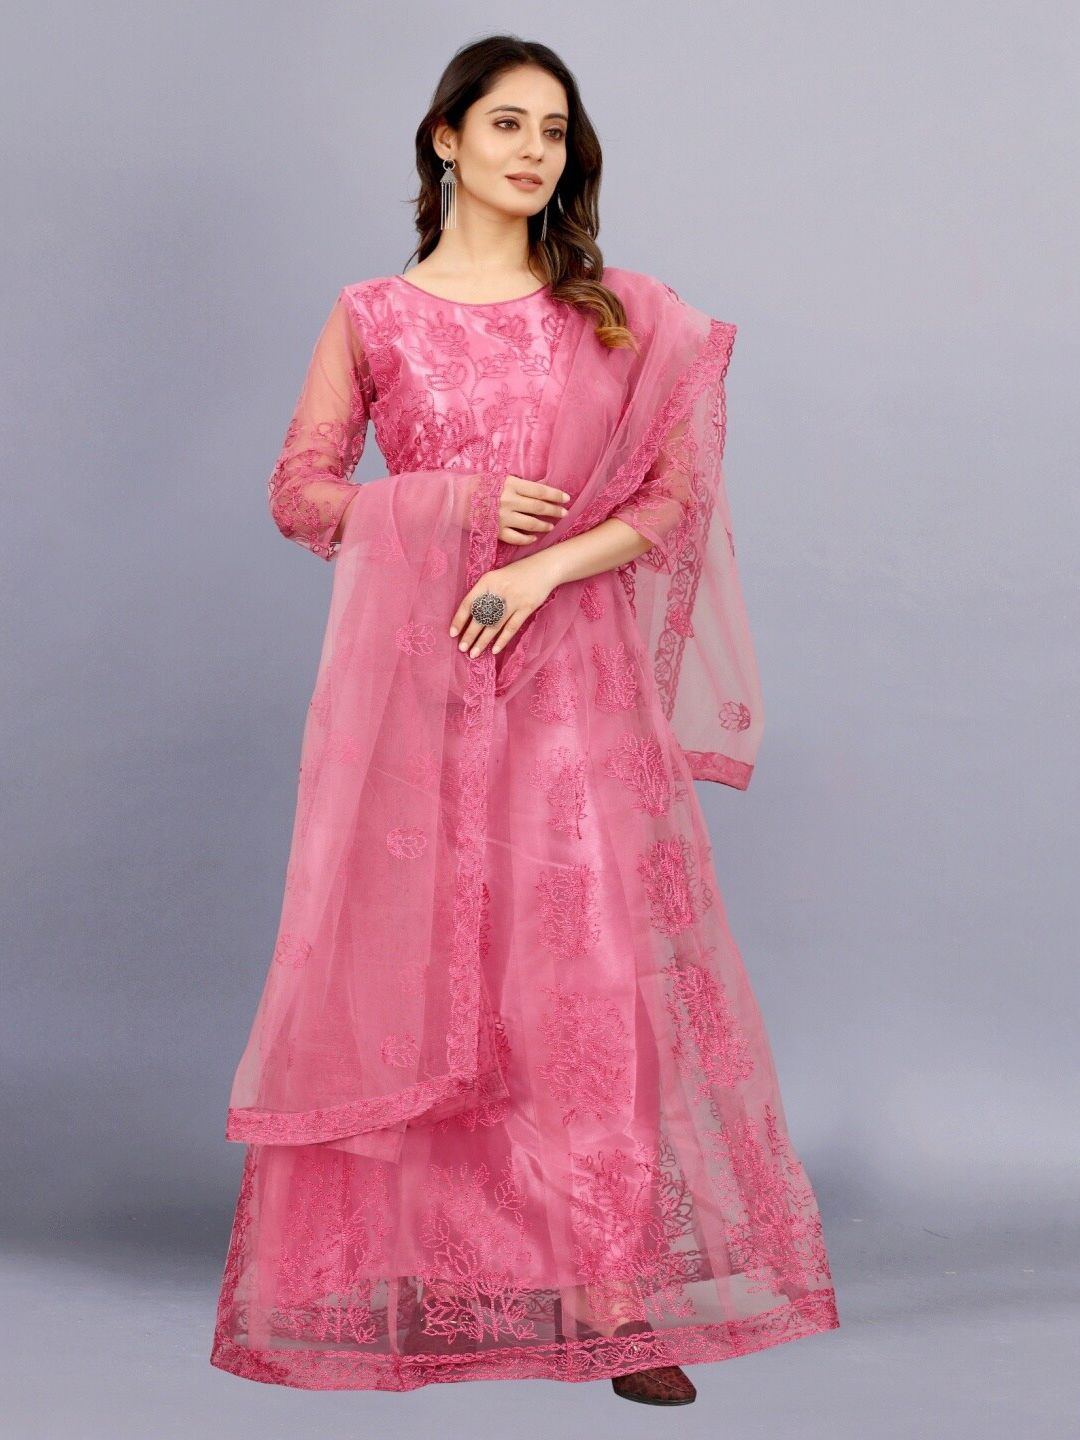 APNISHA Peach-Coloured Floral Embroidered Net Ethnic Maxi Semi-Stitched Gown With Dupatta Price in India